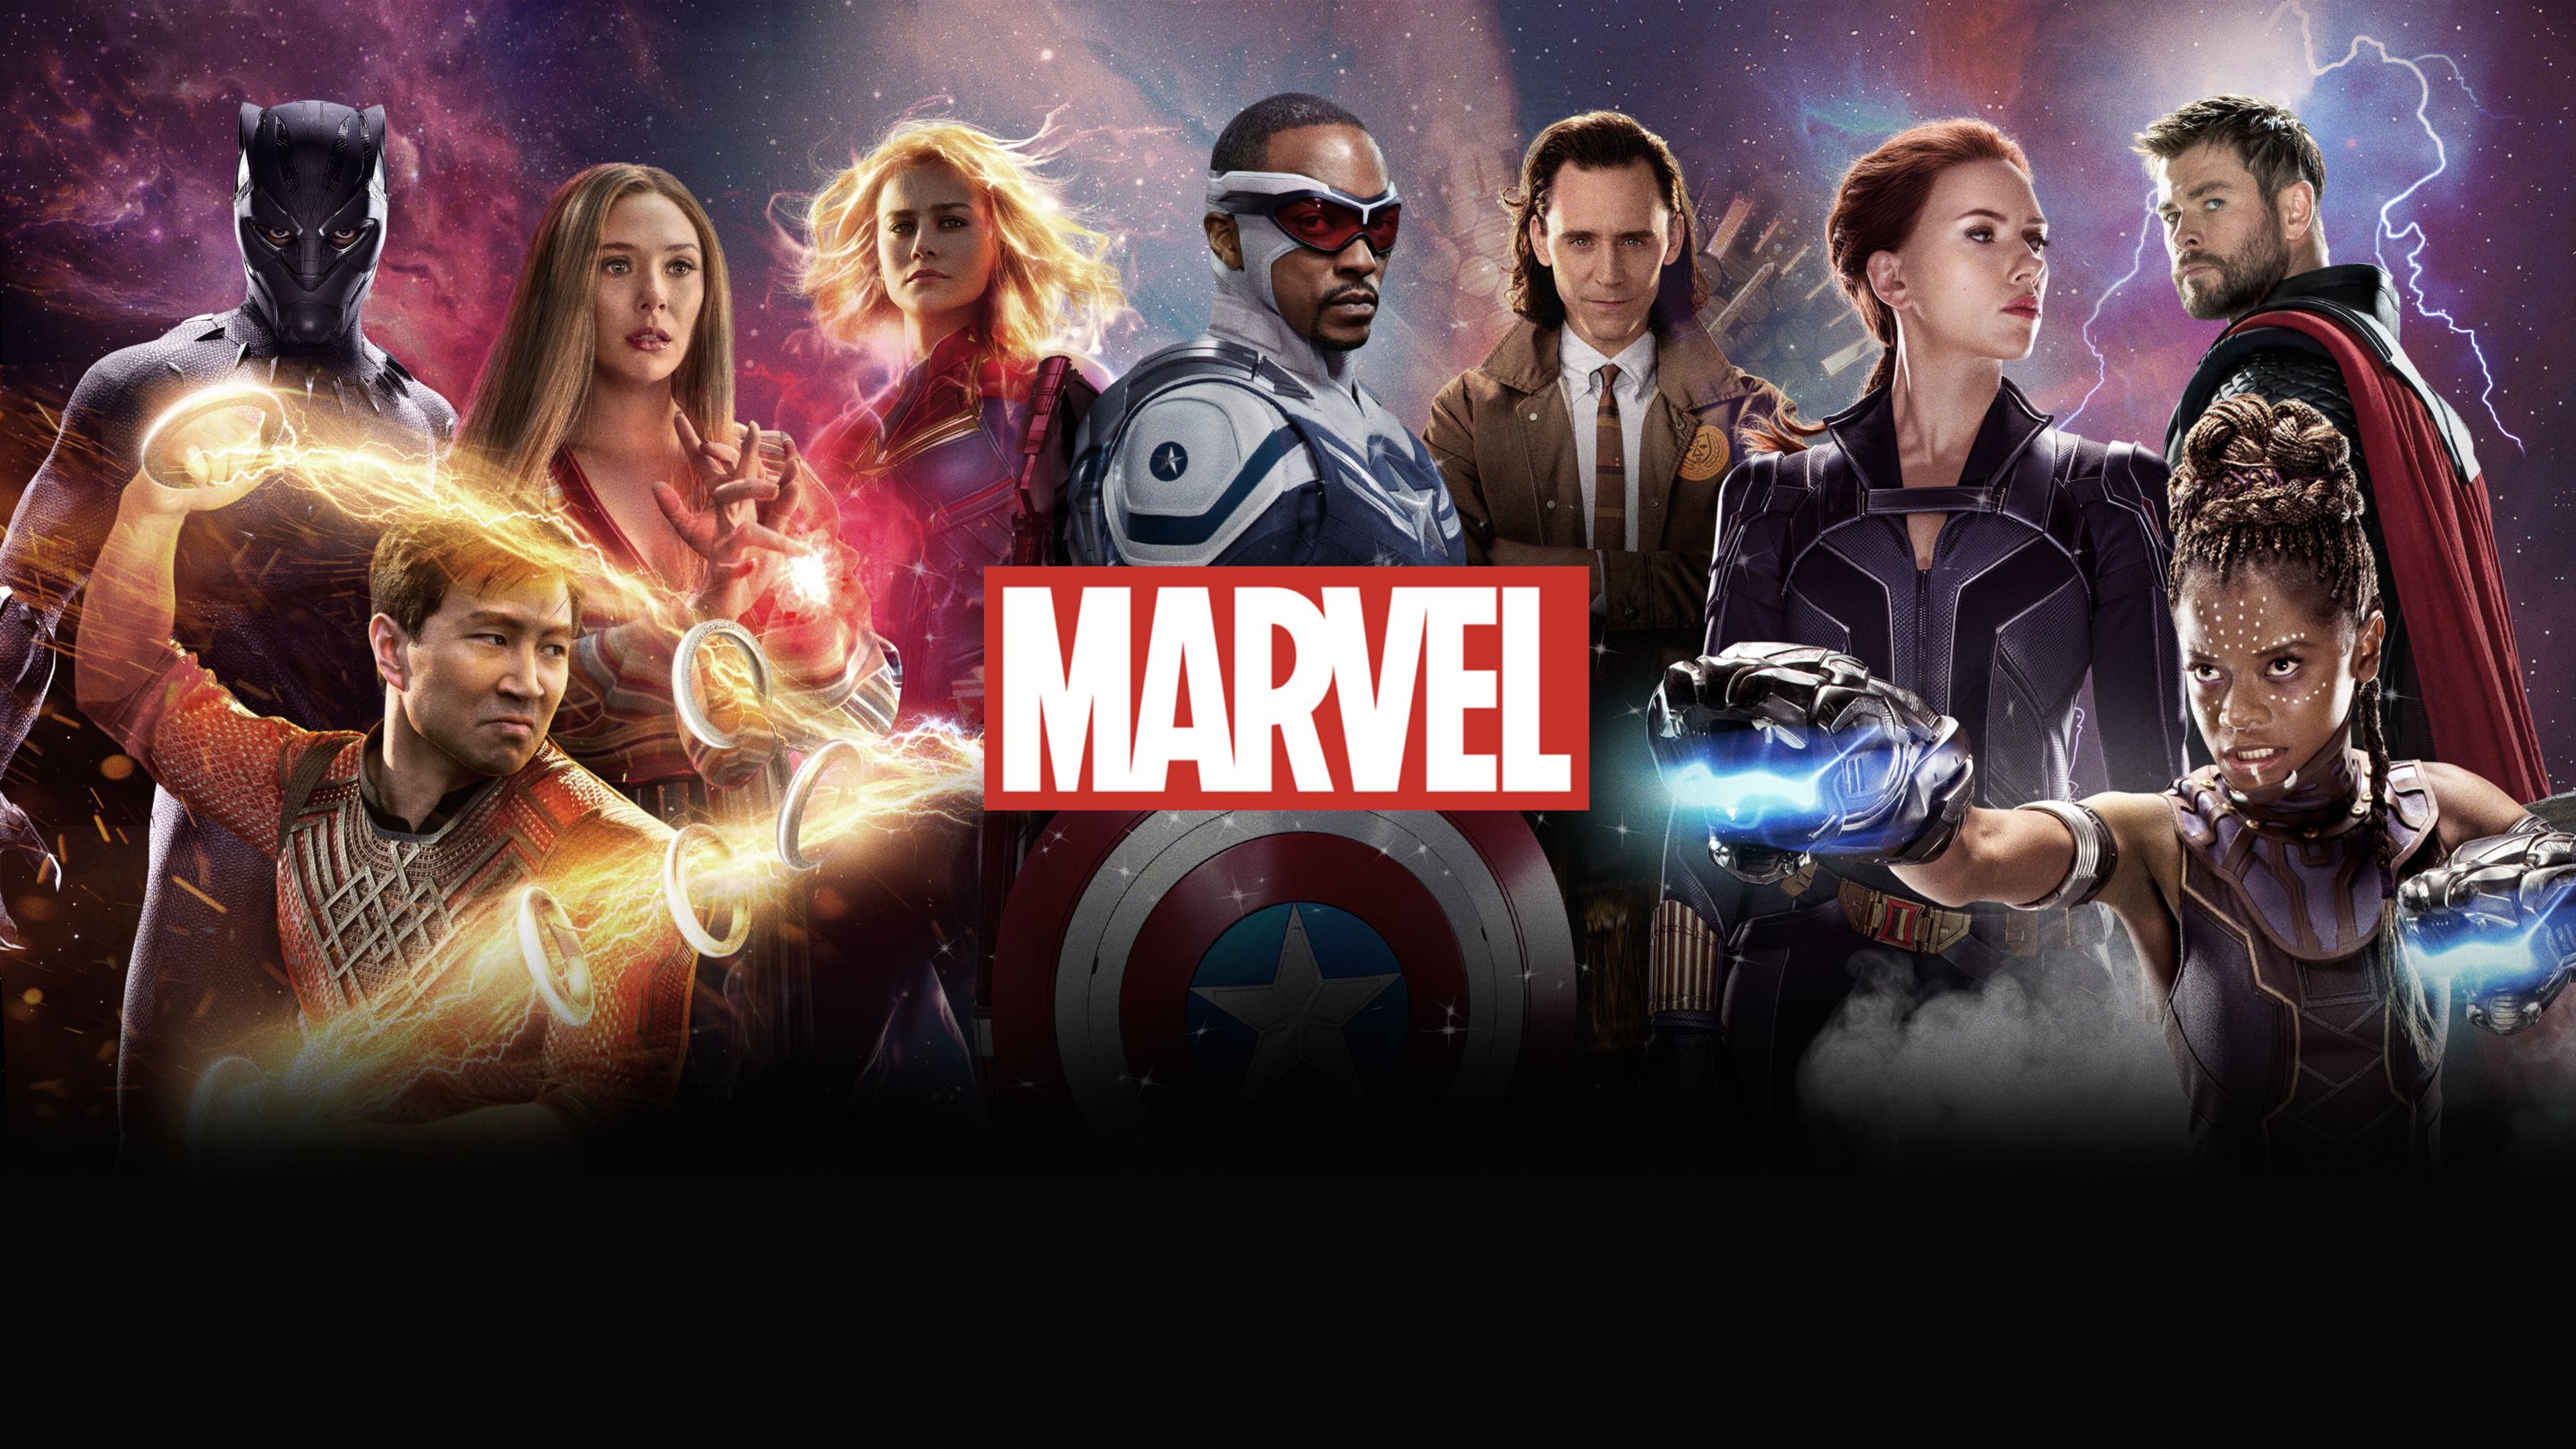 Marvel Movies and Shows. Disney+